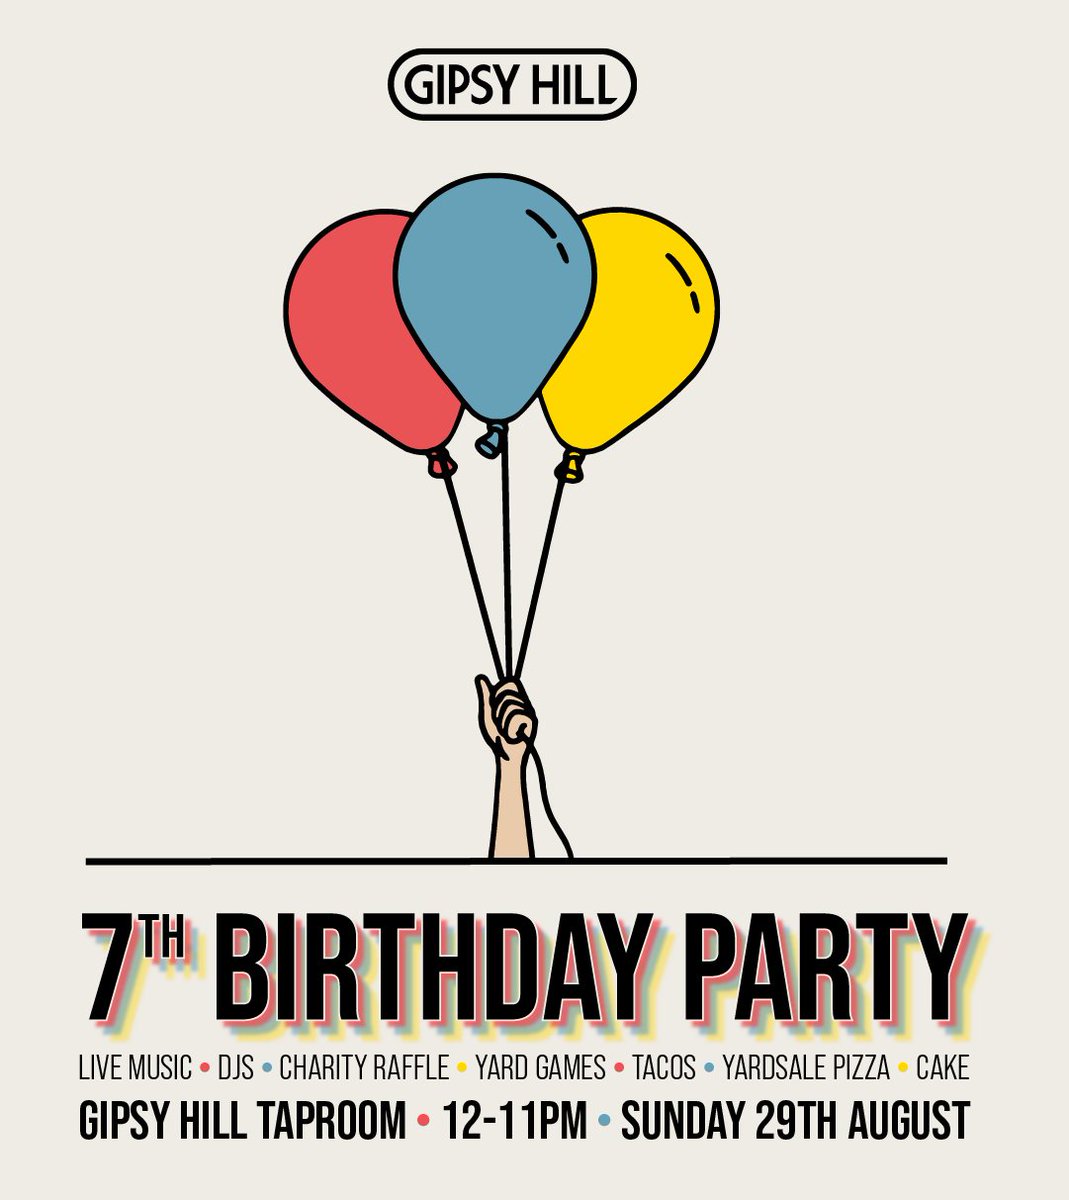 We're celebrating @gipsyhillbrew SEVENTH birthday this week, and to thank everyone for their continued support, we're throwing a HUGE party this Sunday (29th) from 12pm-late. There's DJs, Yard Games, Raffles and much more... Book your table through the link in our bio.